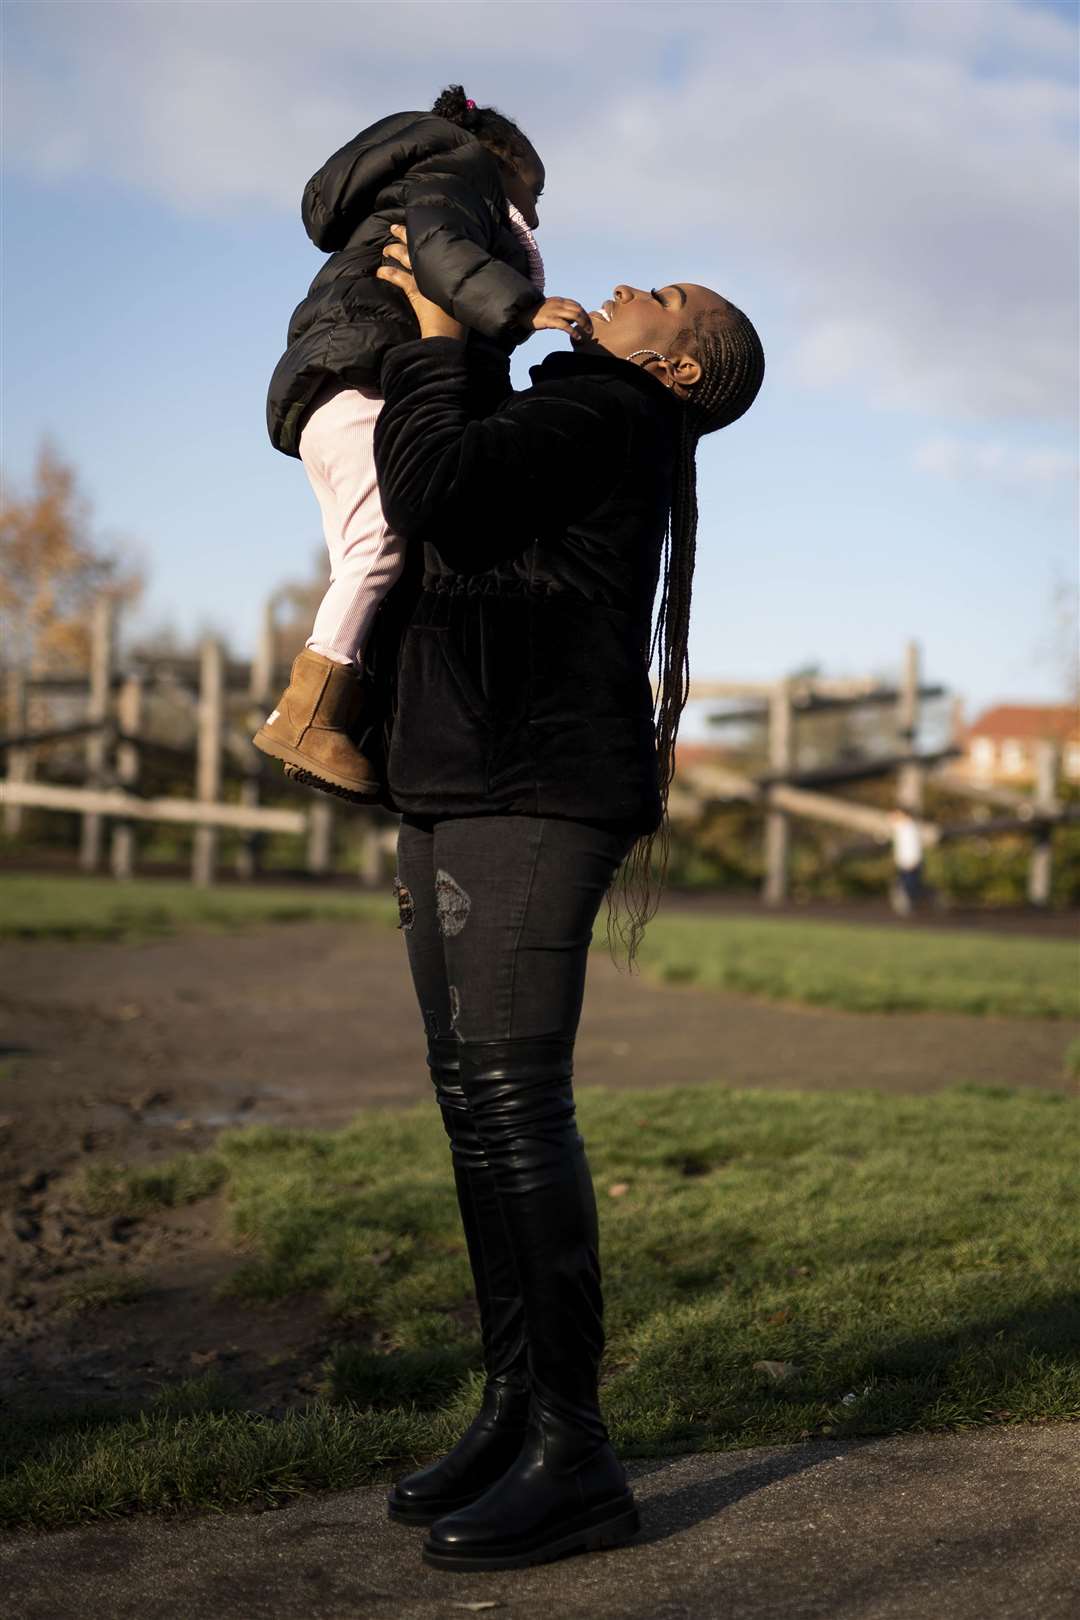 Naomi, 29, and her two-year-old daughter are pictured as part of the Centre for Homelessness Impact’s online image library of people experiencing homelessness (Aaron Chown/PA/Centre for Homelessness Impact)